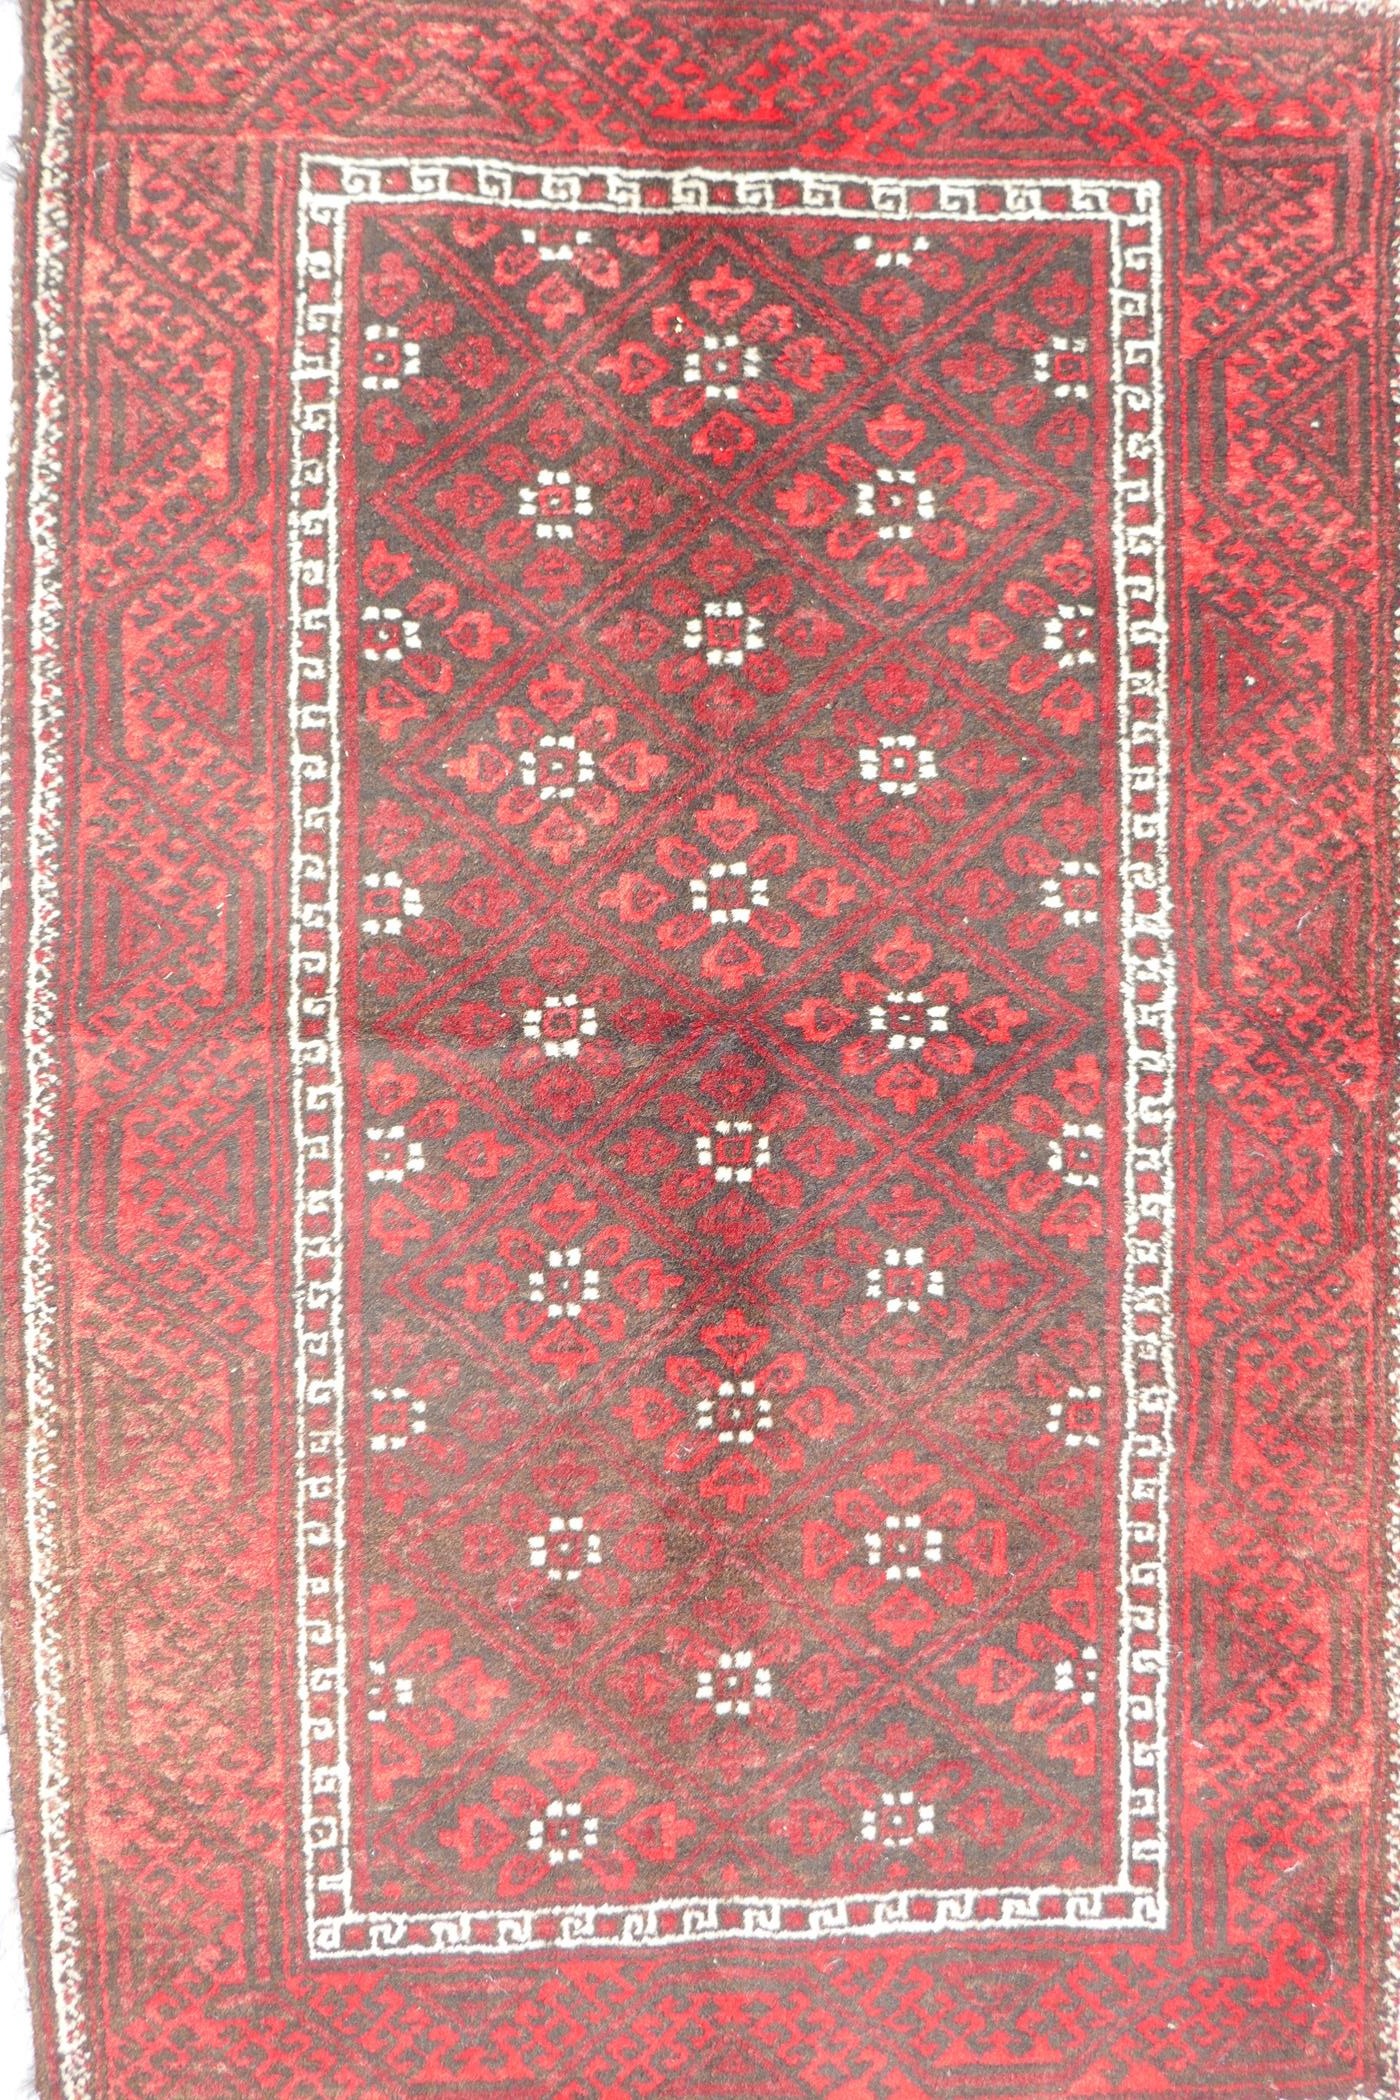 A Middle Eastern red ground wool rug with a repeating diamond pattern design, 34" x 51"